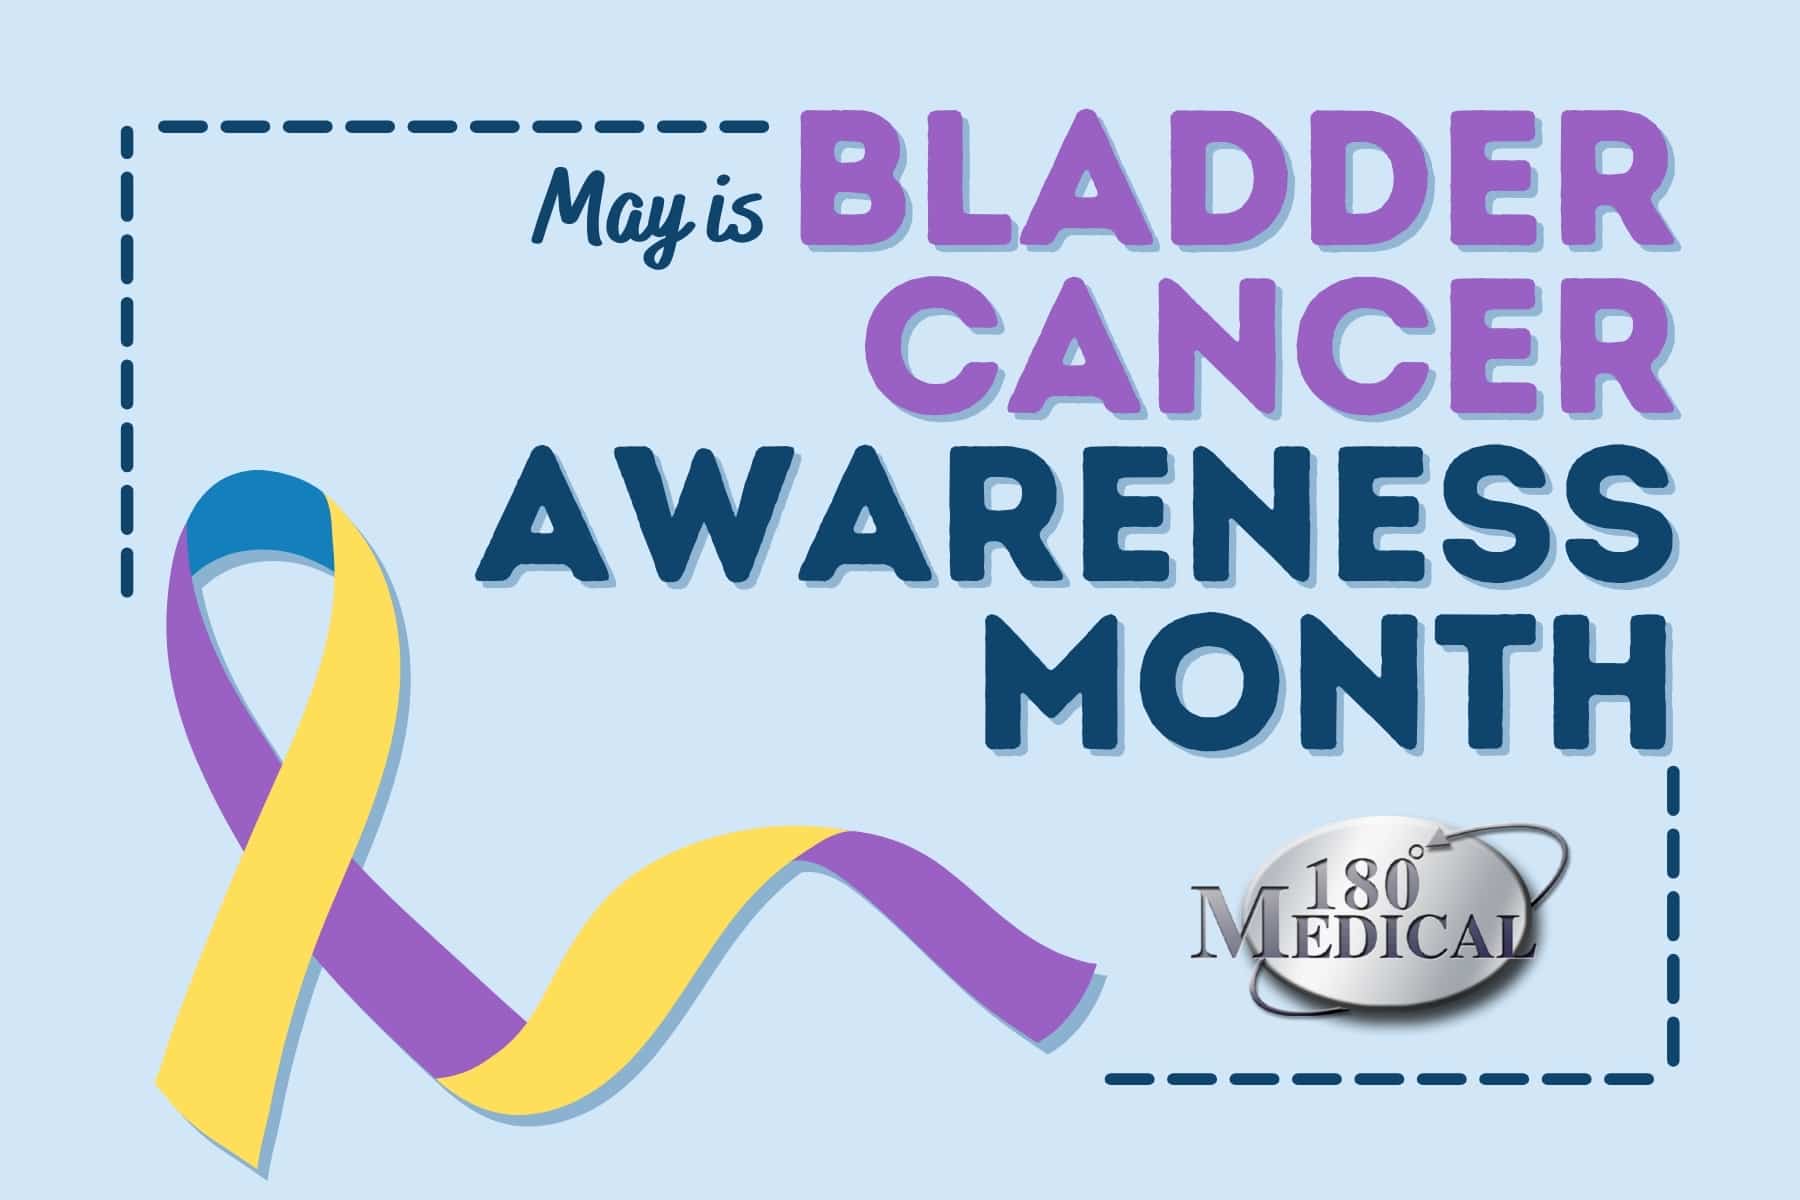 May is Bladder Cancer Awareness Month - 180 Medical